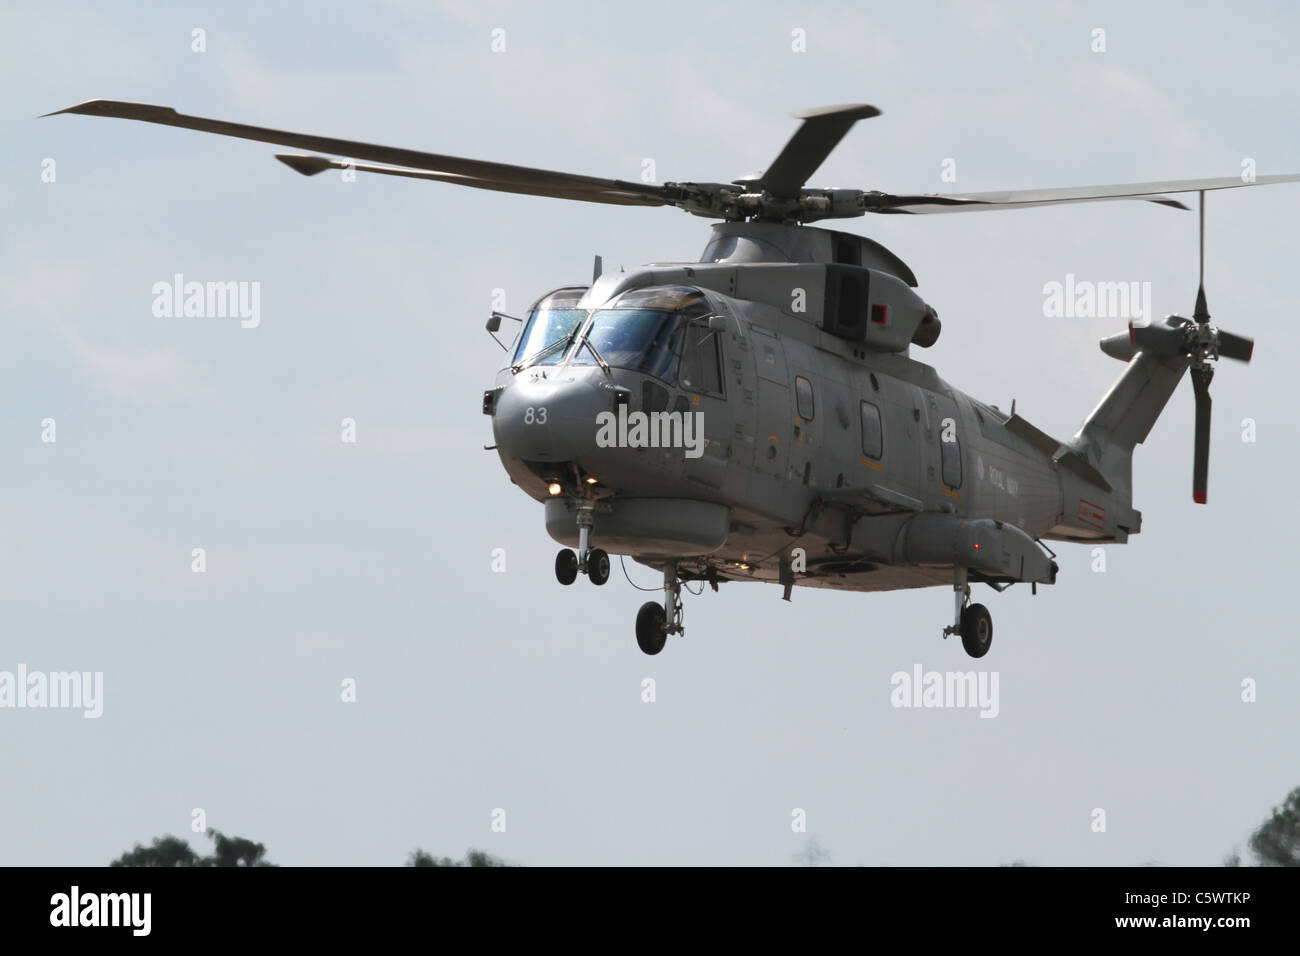 MERLIN HM1 HELICOPTER ROYAL NAVY'S 824 NAS 02 July 2011 Stock Photo